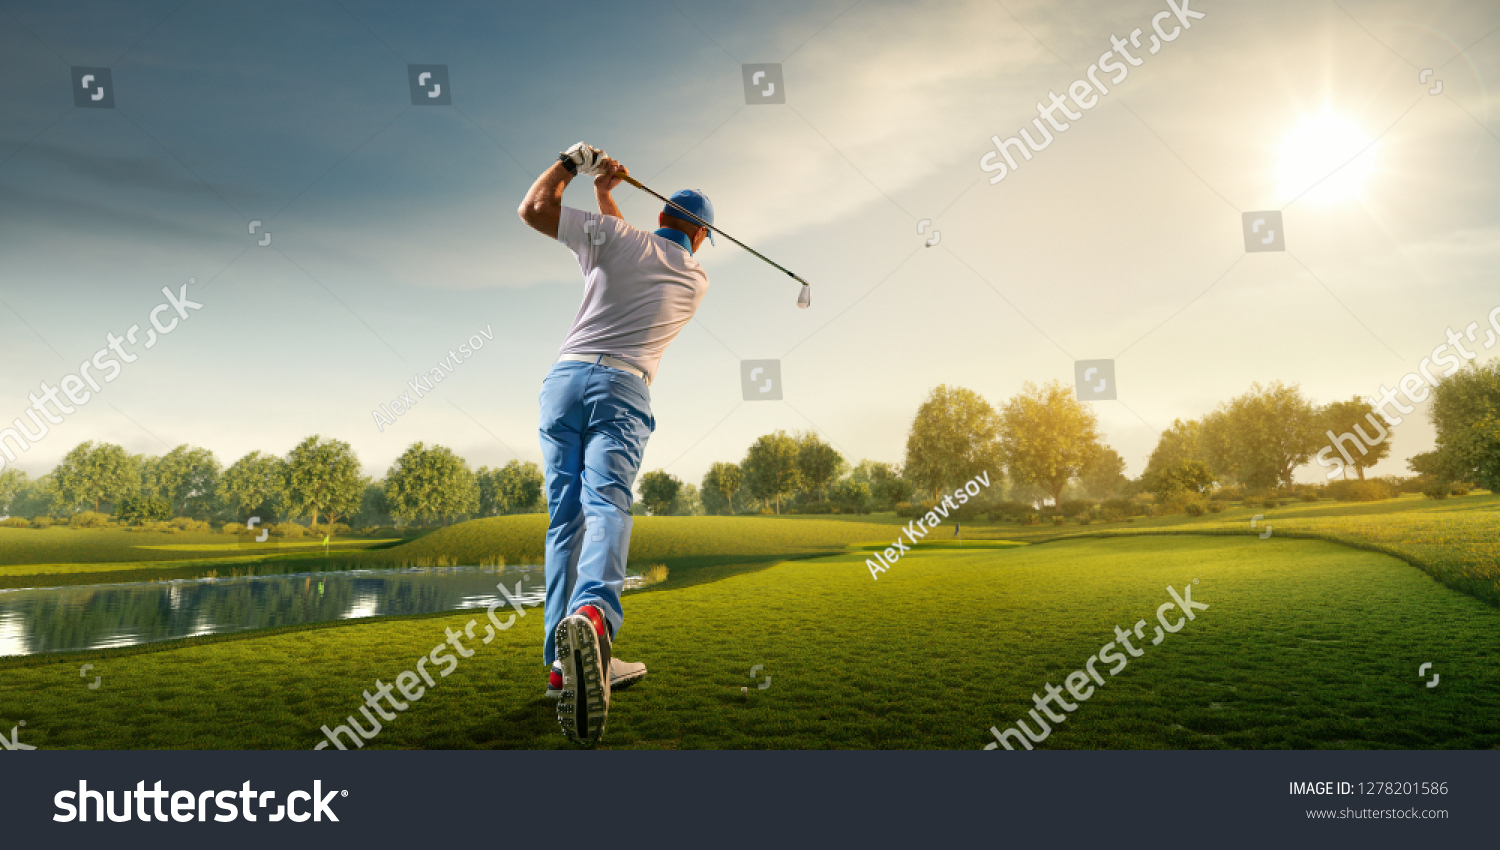 Male golf player on professional golf course. Golfer with golf club taking a shot #1278201586